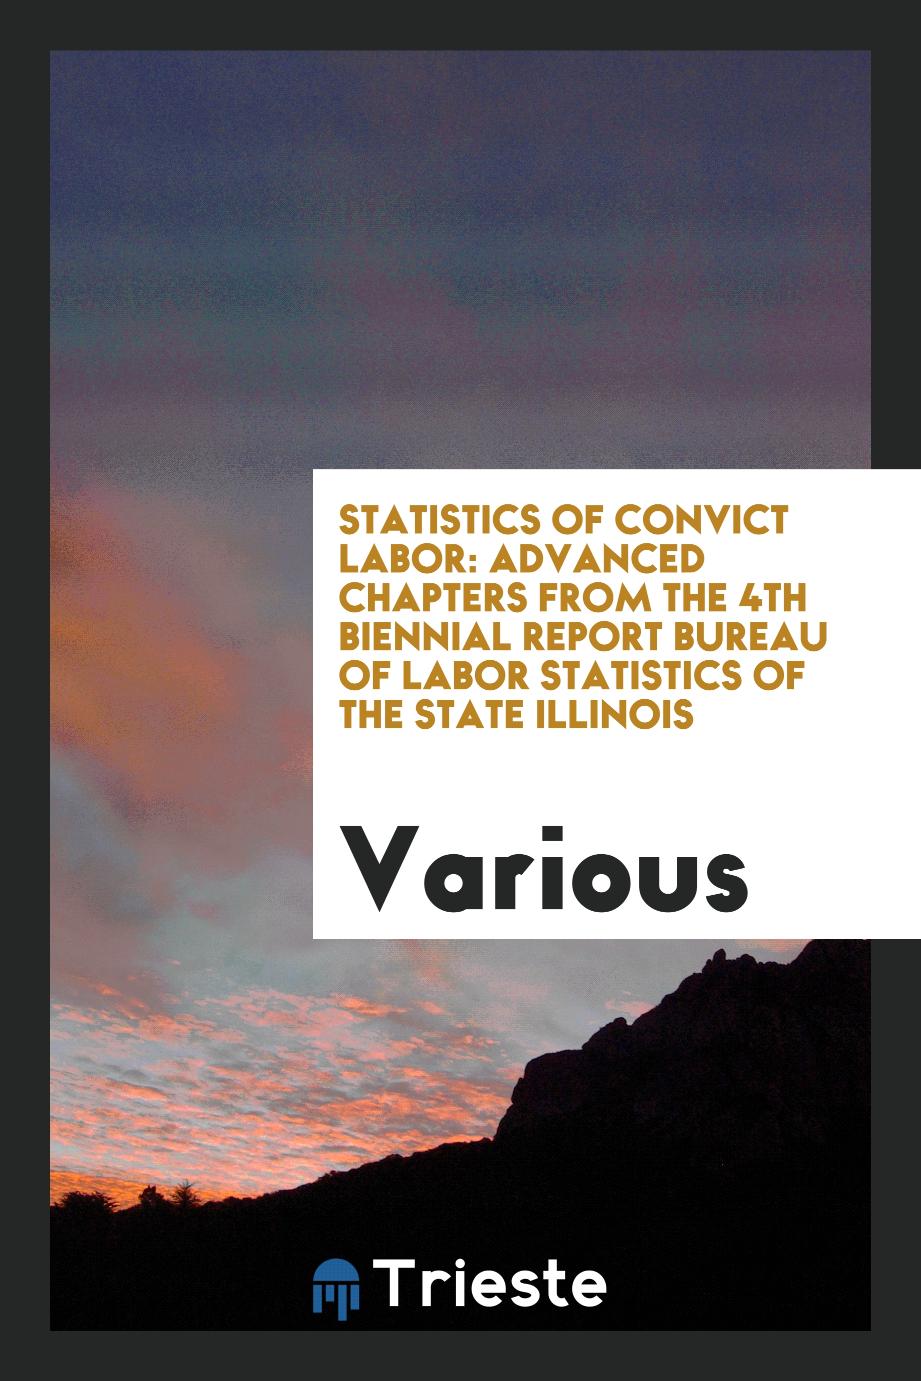 Statistics of Convict Labor: Advanced Chapters from the 4th Biennial Report Bureau of Labor Statistics of the State Illinois